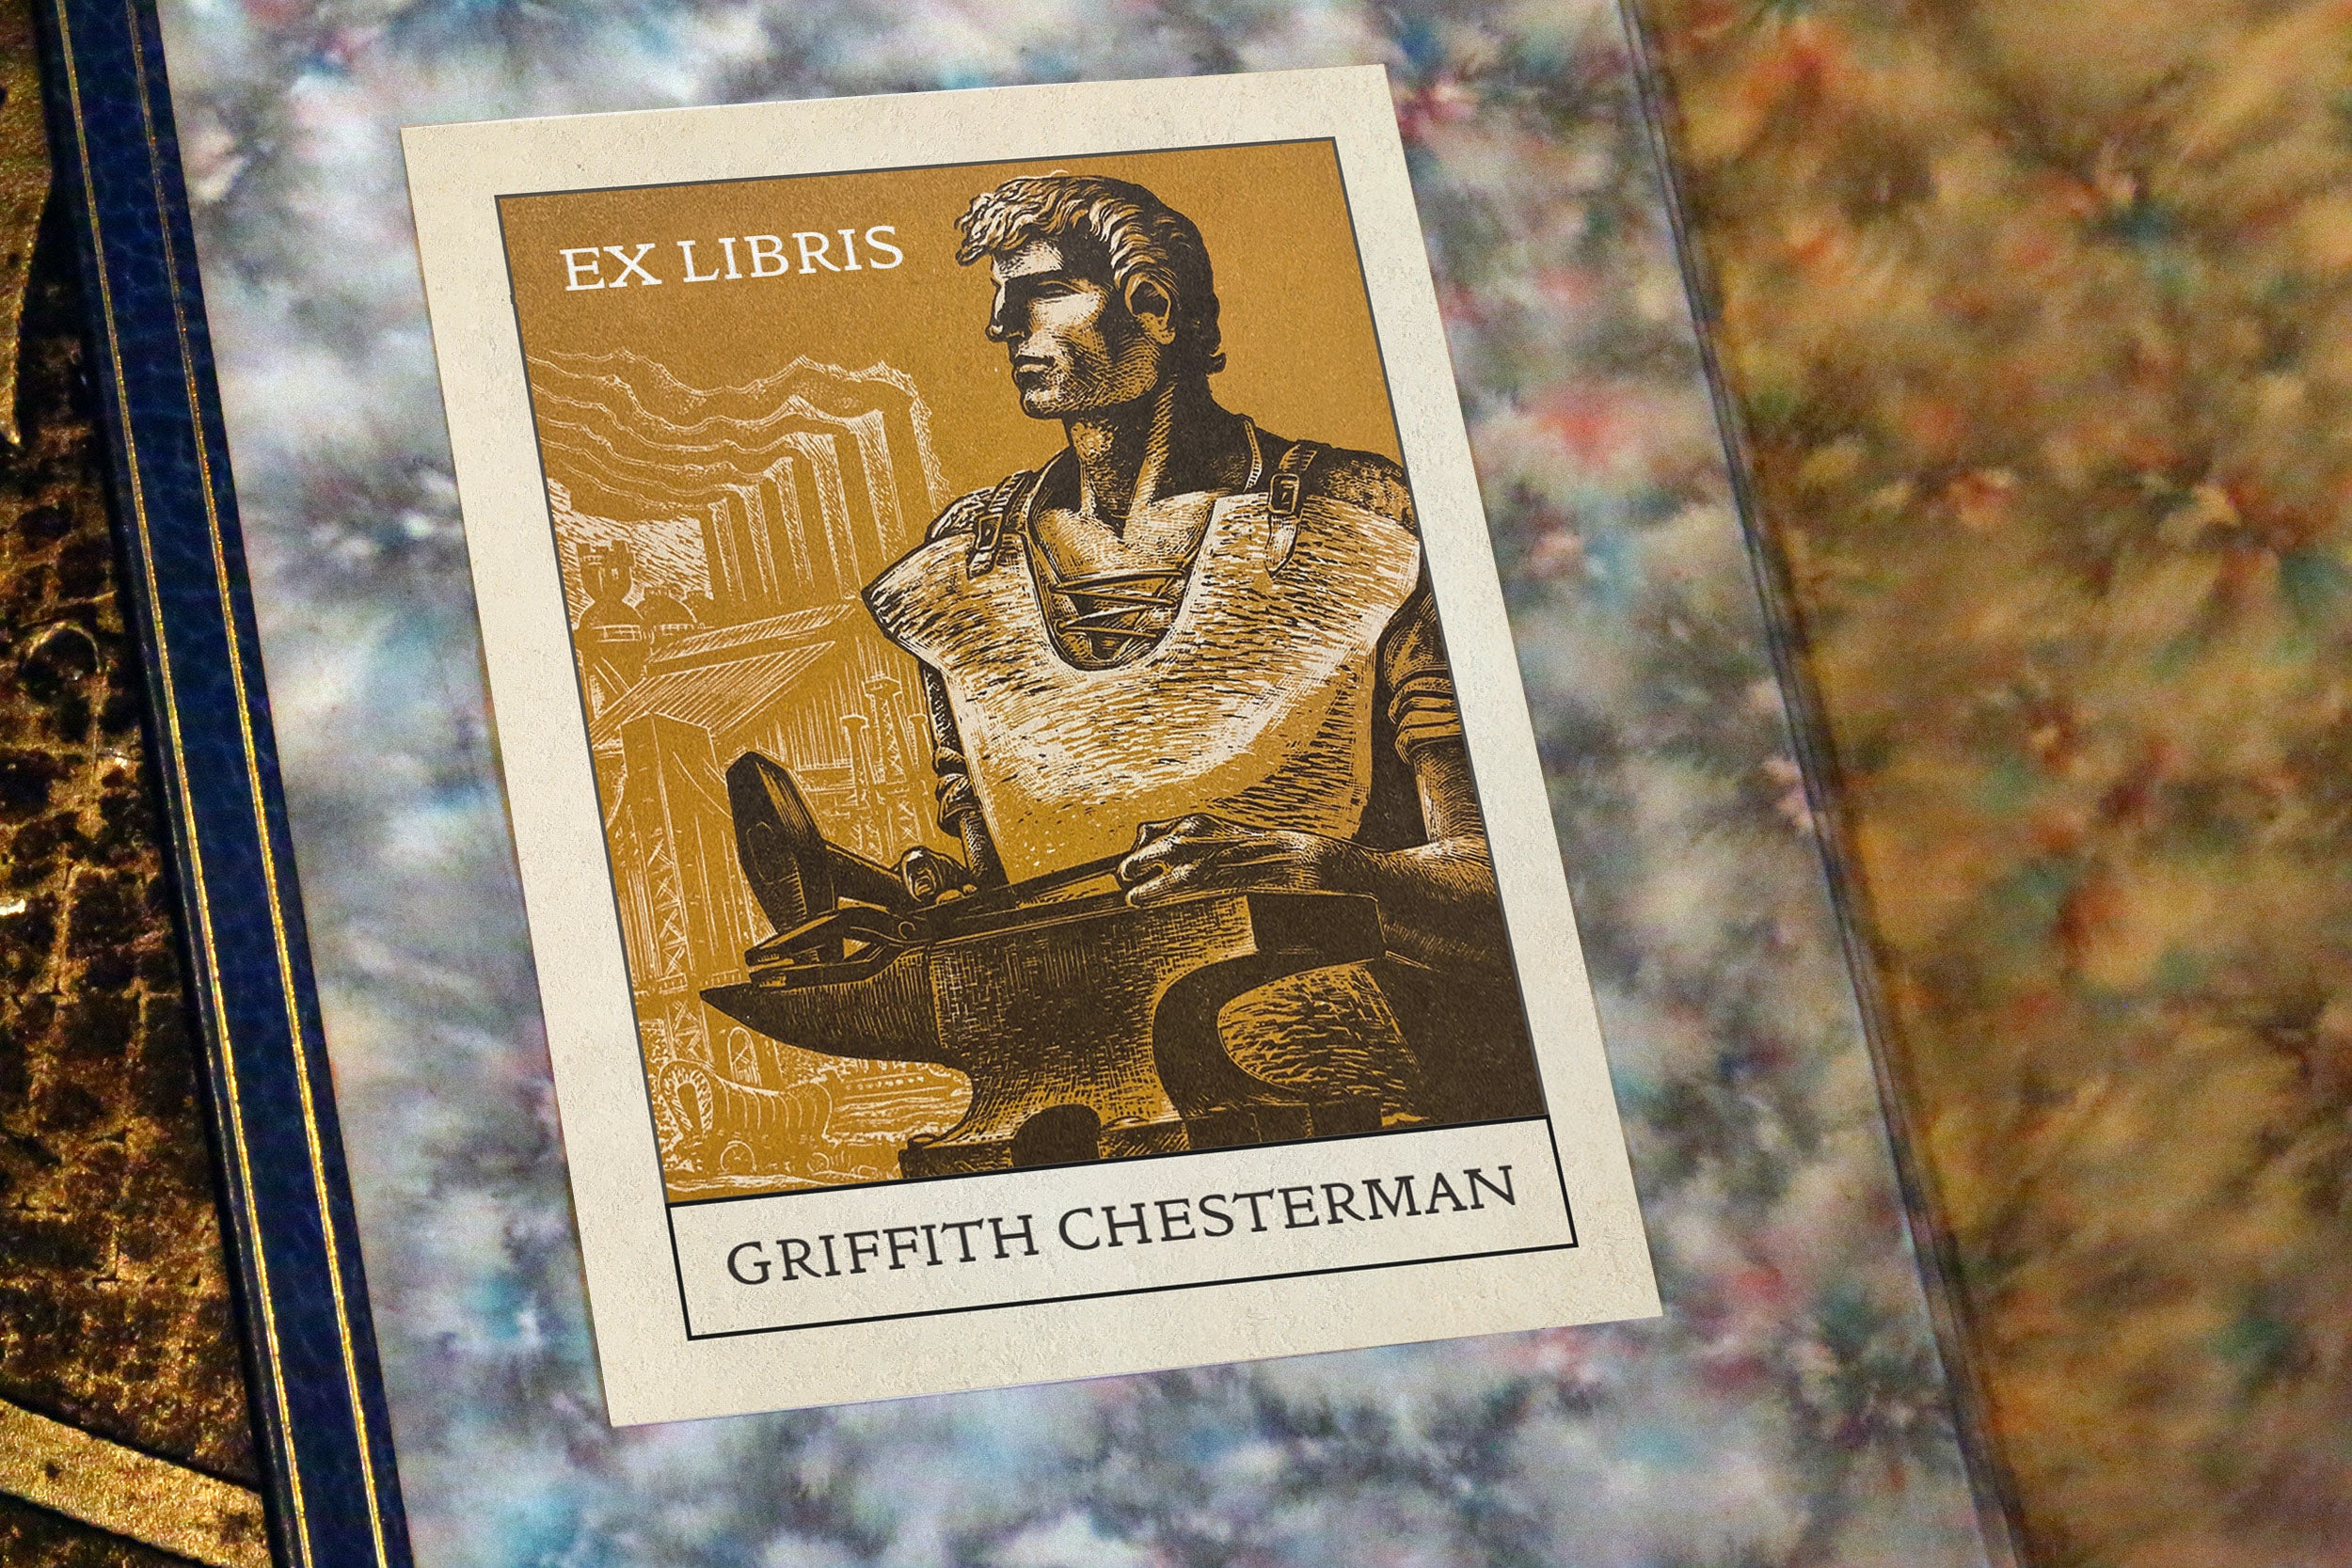 Modern Hephaestus, Personalized Ex-Libris Bookplates, Crafted on Traditional Gummed Paper, 3in x 4in, Set of 30